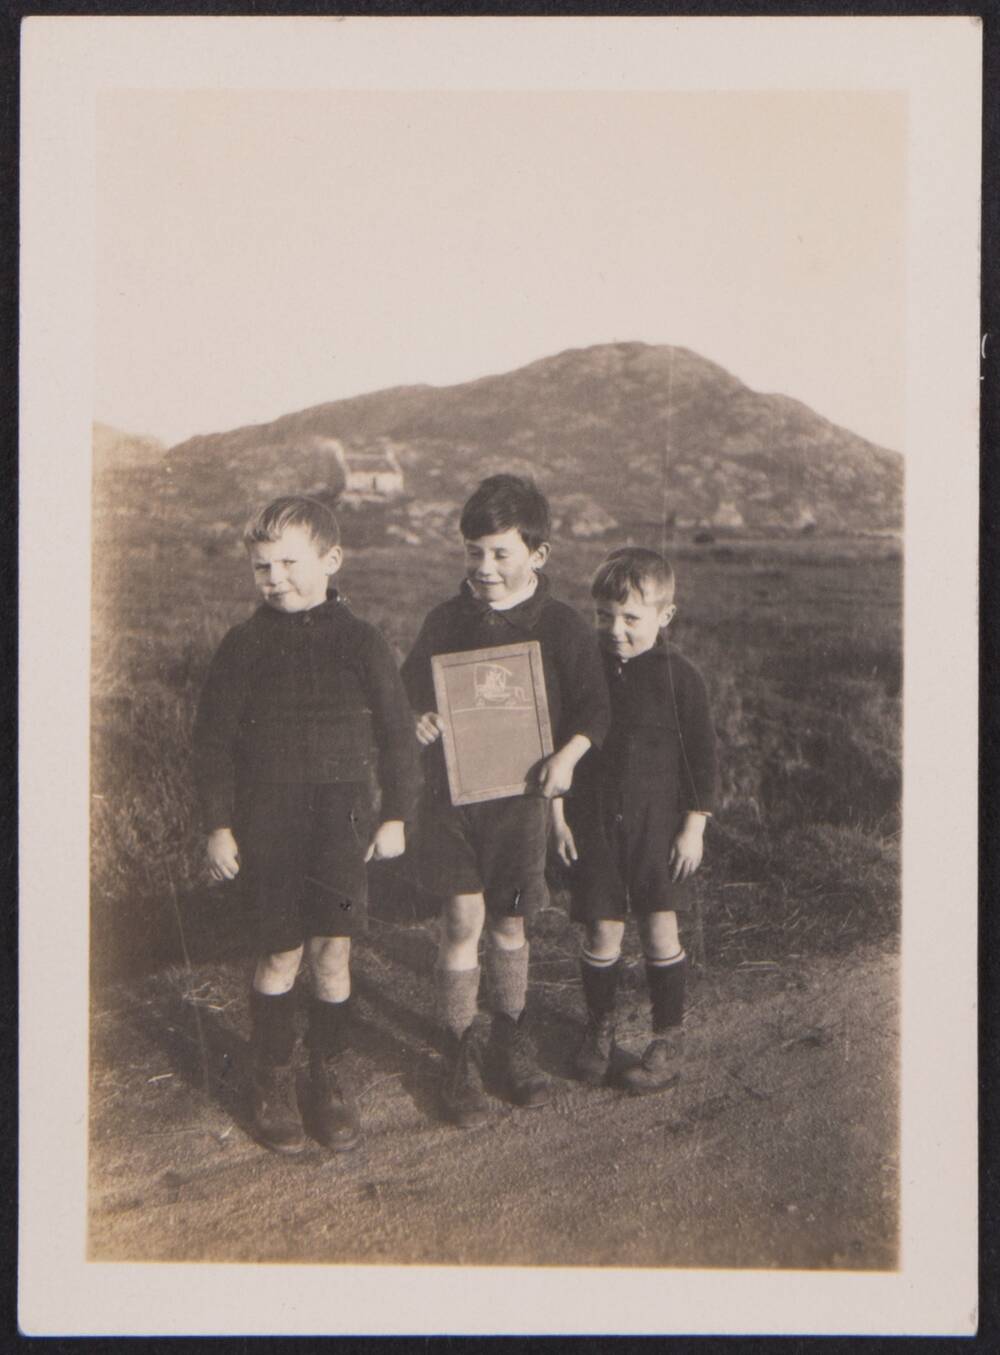 A black and white photograph of three young schoolboys standing at the edge of a road. Hills and a single cottage stand in the background. The boys all wear black jumpers with dark shorts. The boy in the middle is holding a slate with a chalk drawing on it.